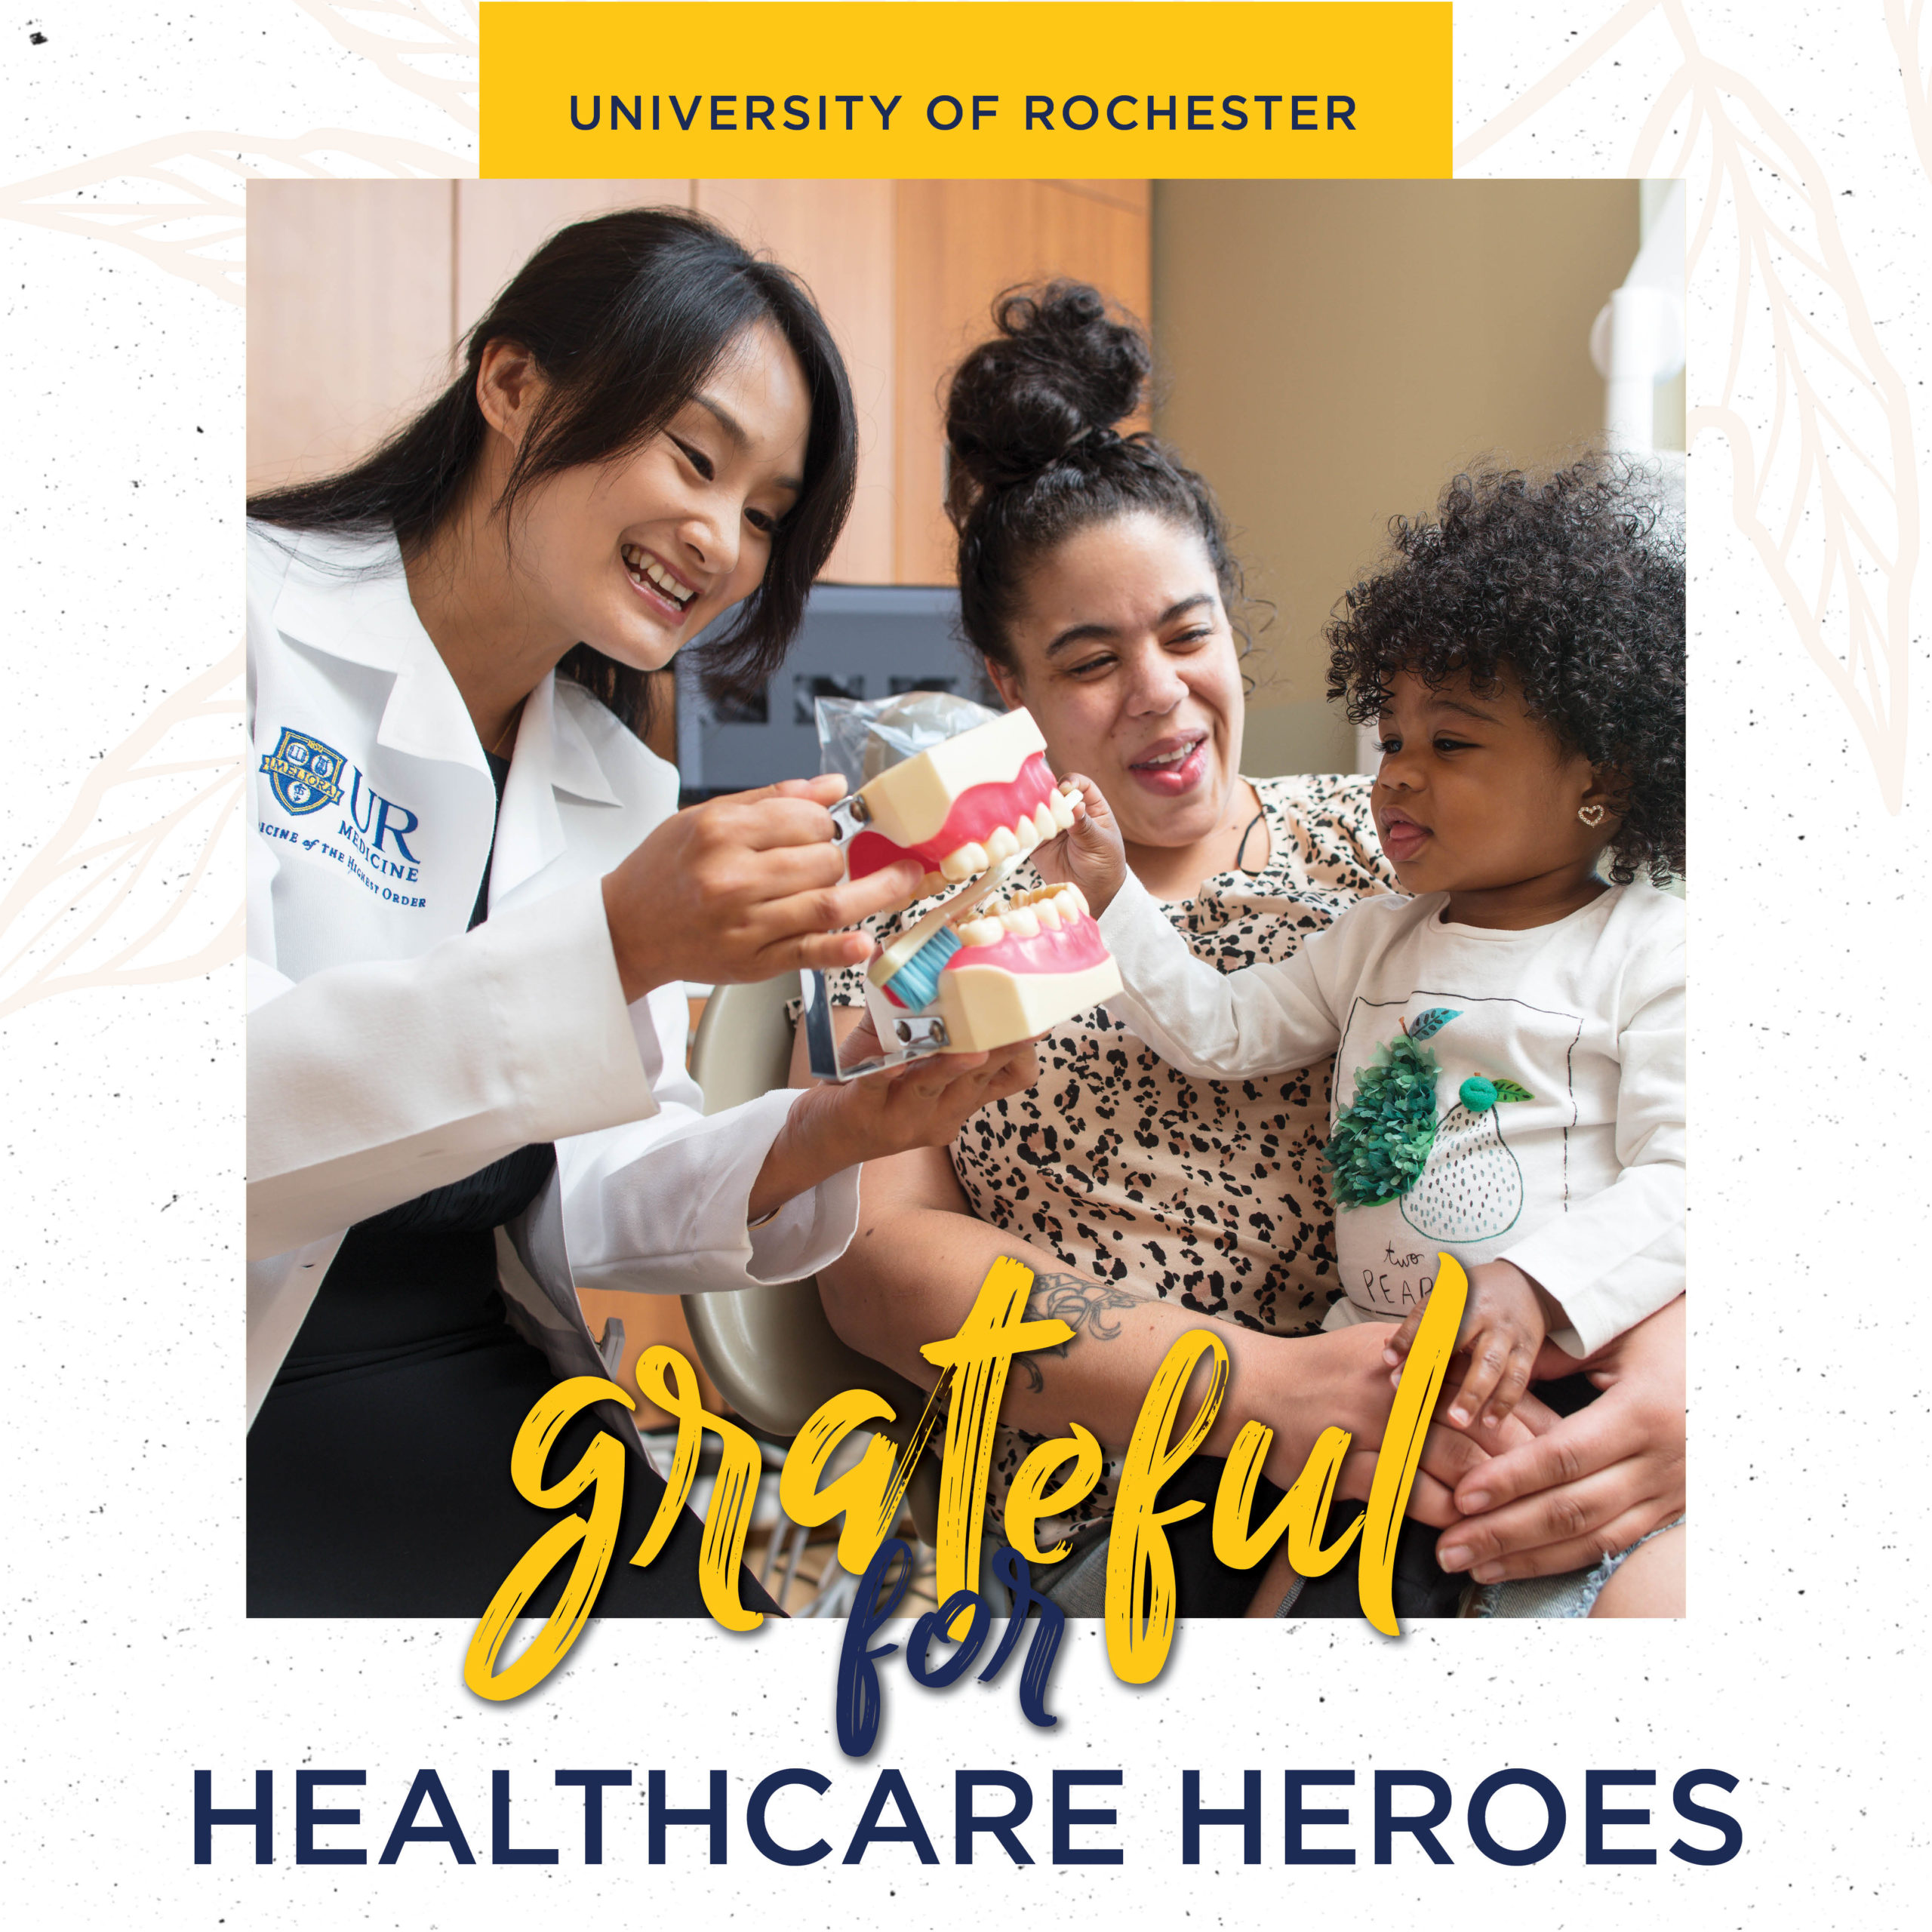 grateful for healthcare heroes - doctor with mother and child holding model of teeth